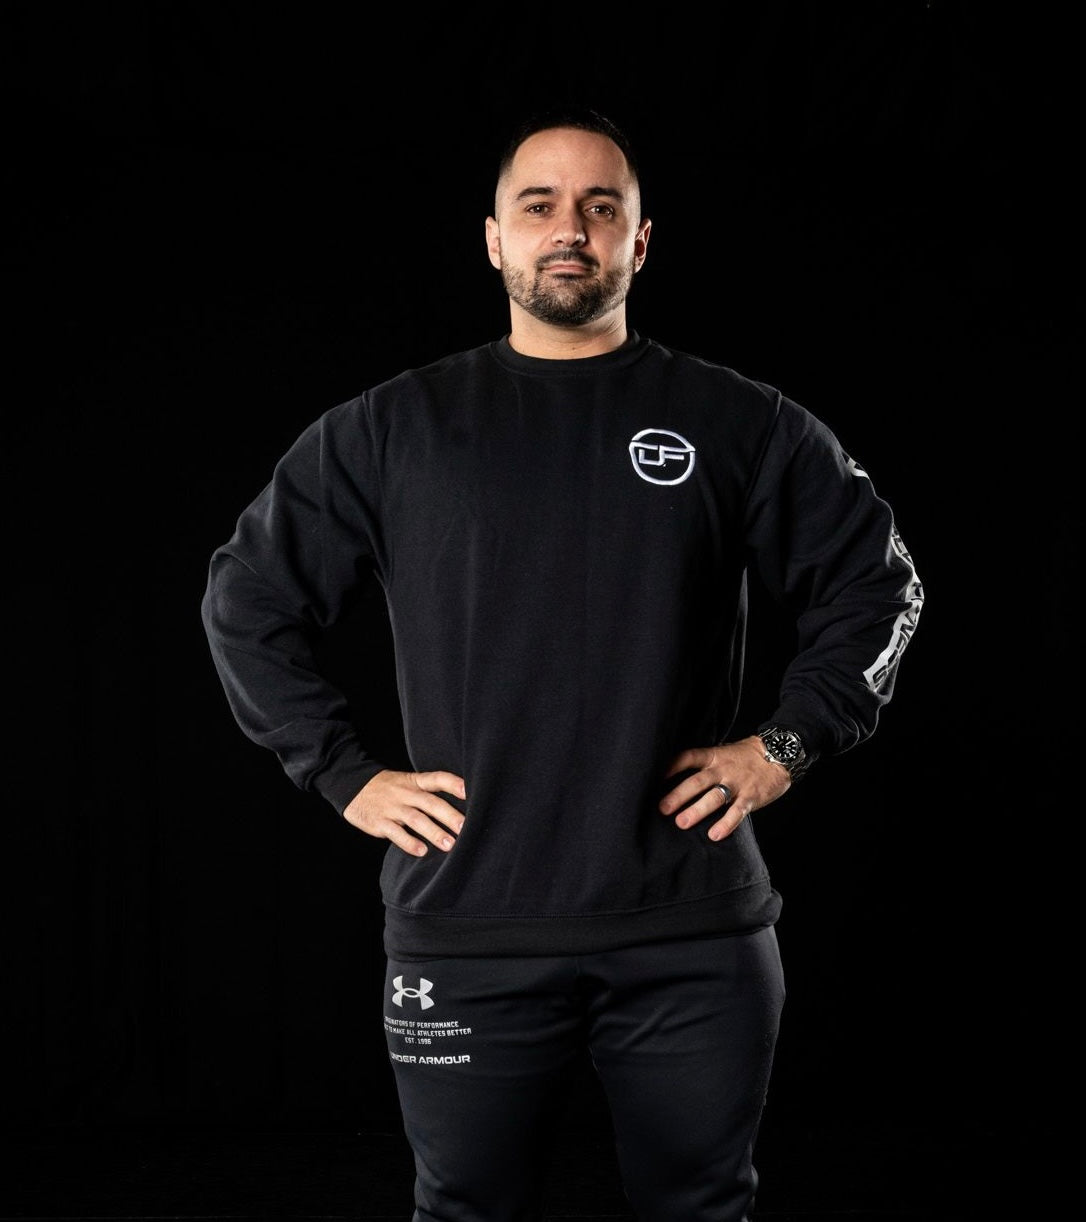 Image of Josh DeMelo, owner and head trainer of DeMelo Fitness. Josh is standing with his arms at his hips against a black background wearing a DeMelo Fitness branded long-sleeved shirt 